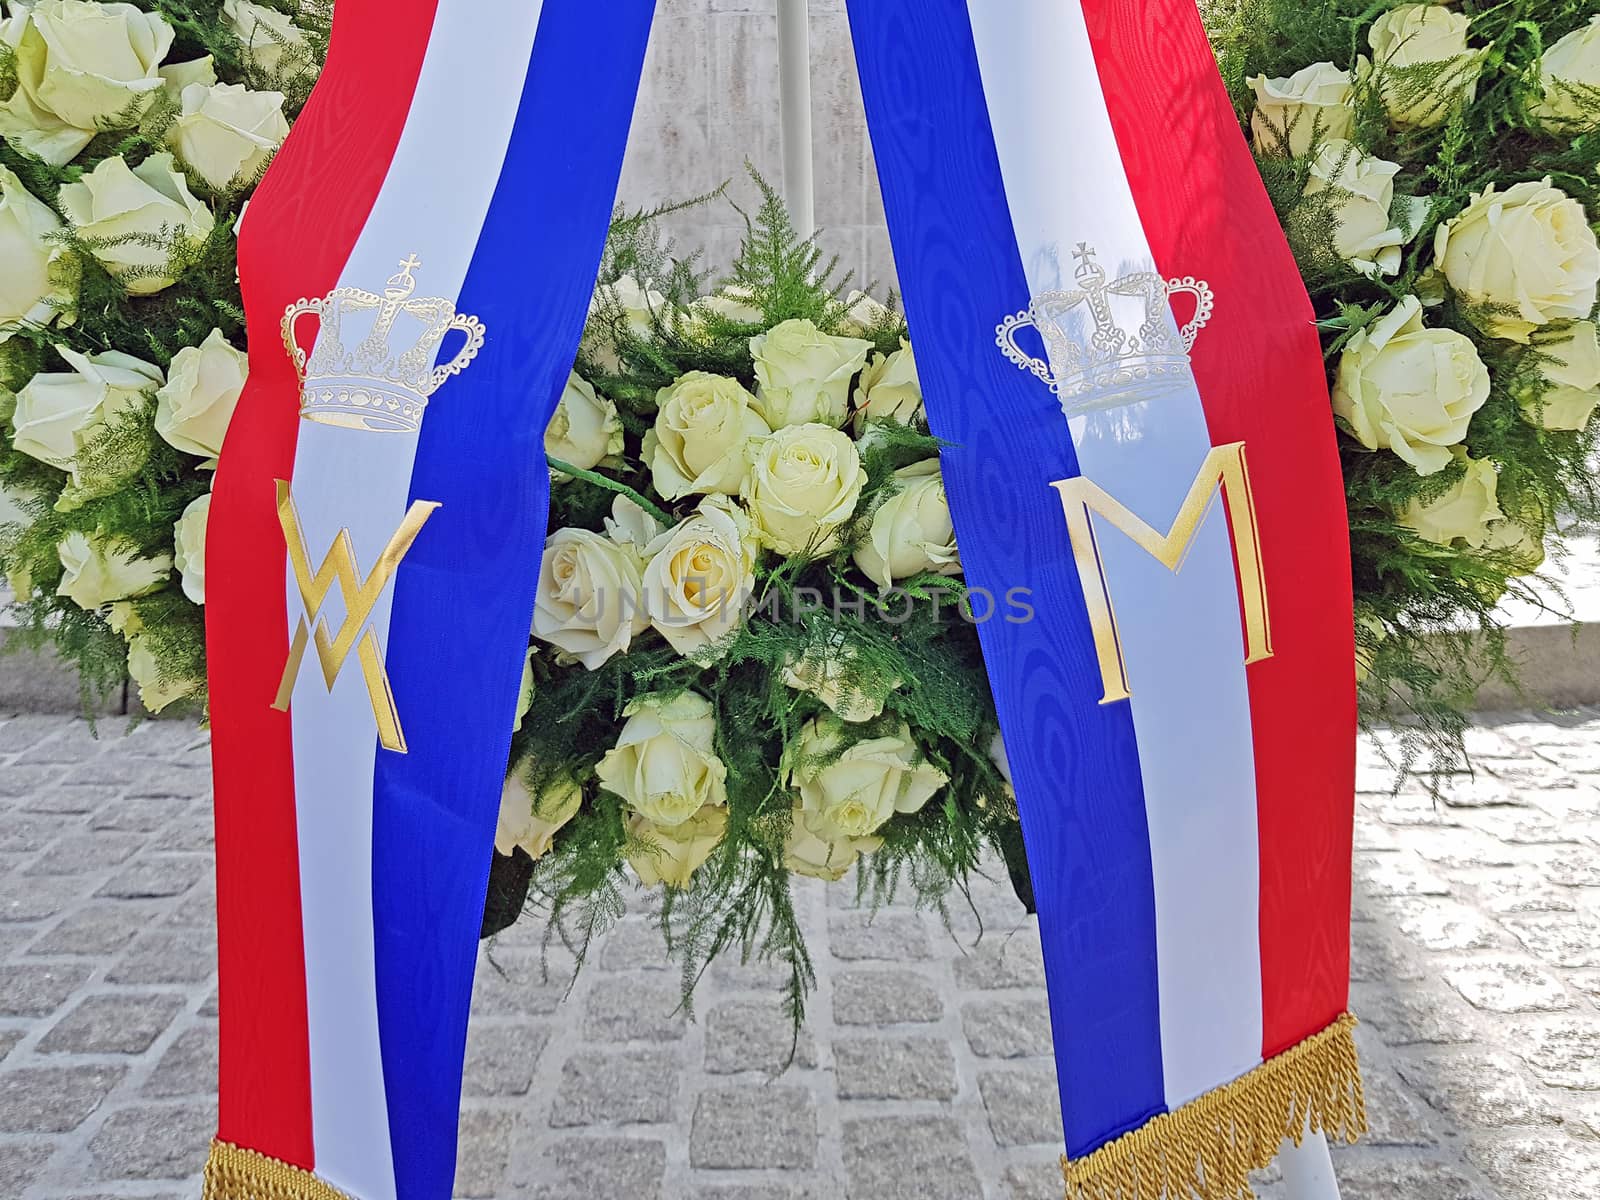 Amsterdam, Netherlands - May 4, 2020: Wreath laying at the National Monument on the Dam by the king and the queen from the Netherlands